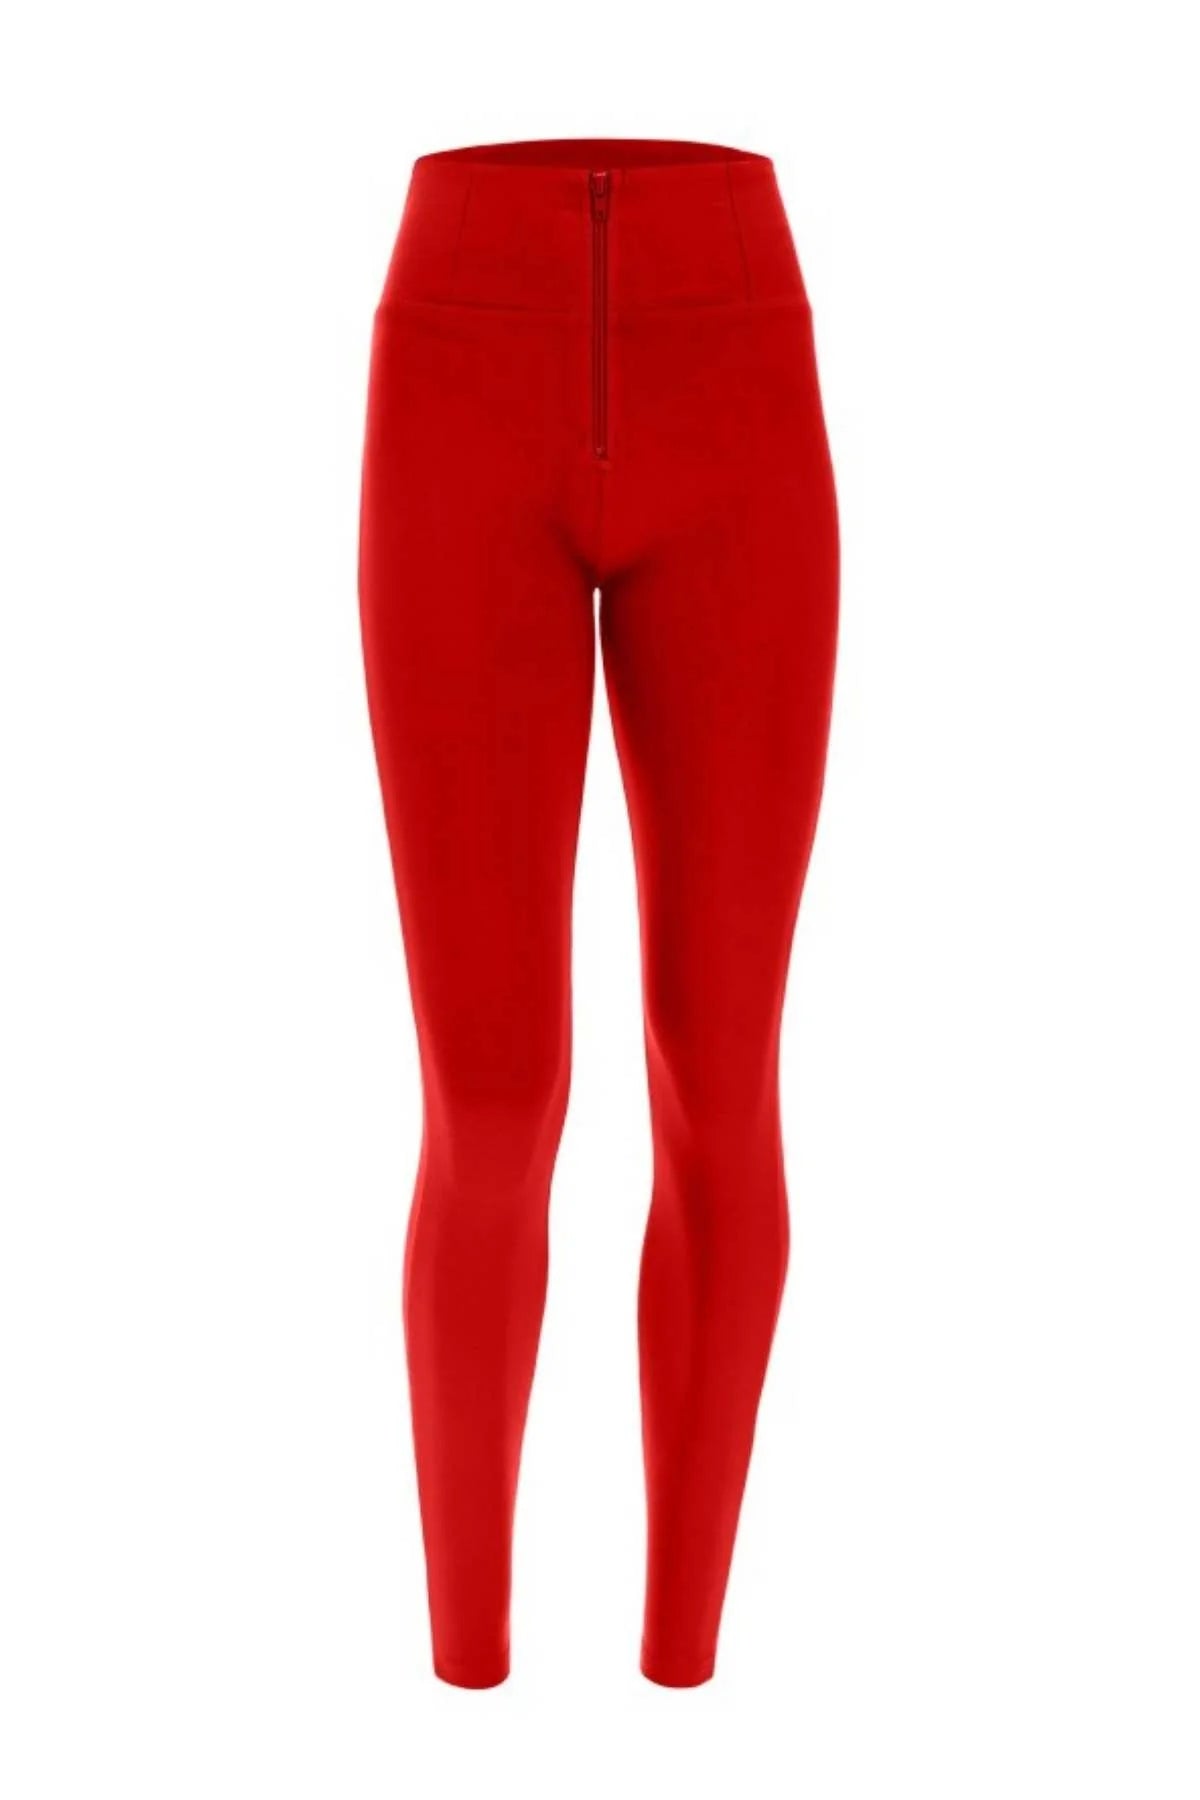 Freddy Jeans - Now Red Leather Pants - Sheena's Boutique Ireland